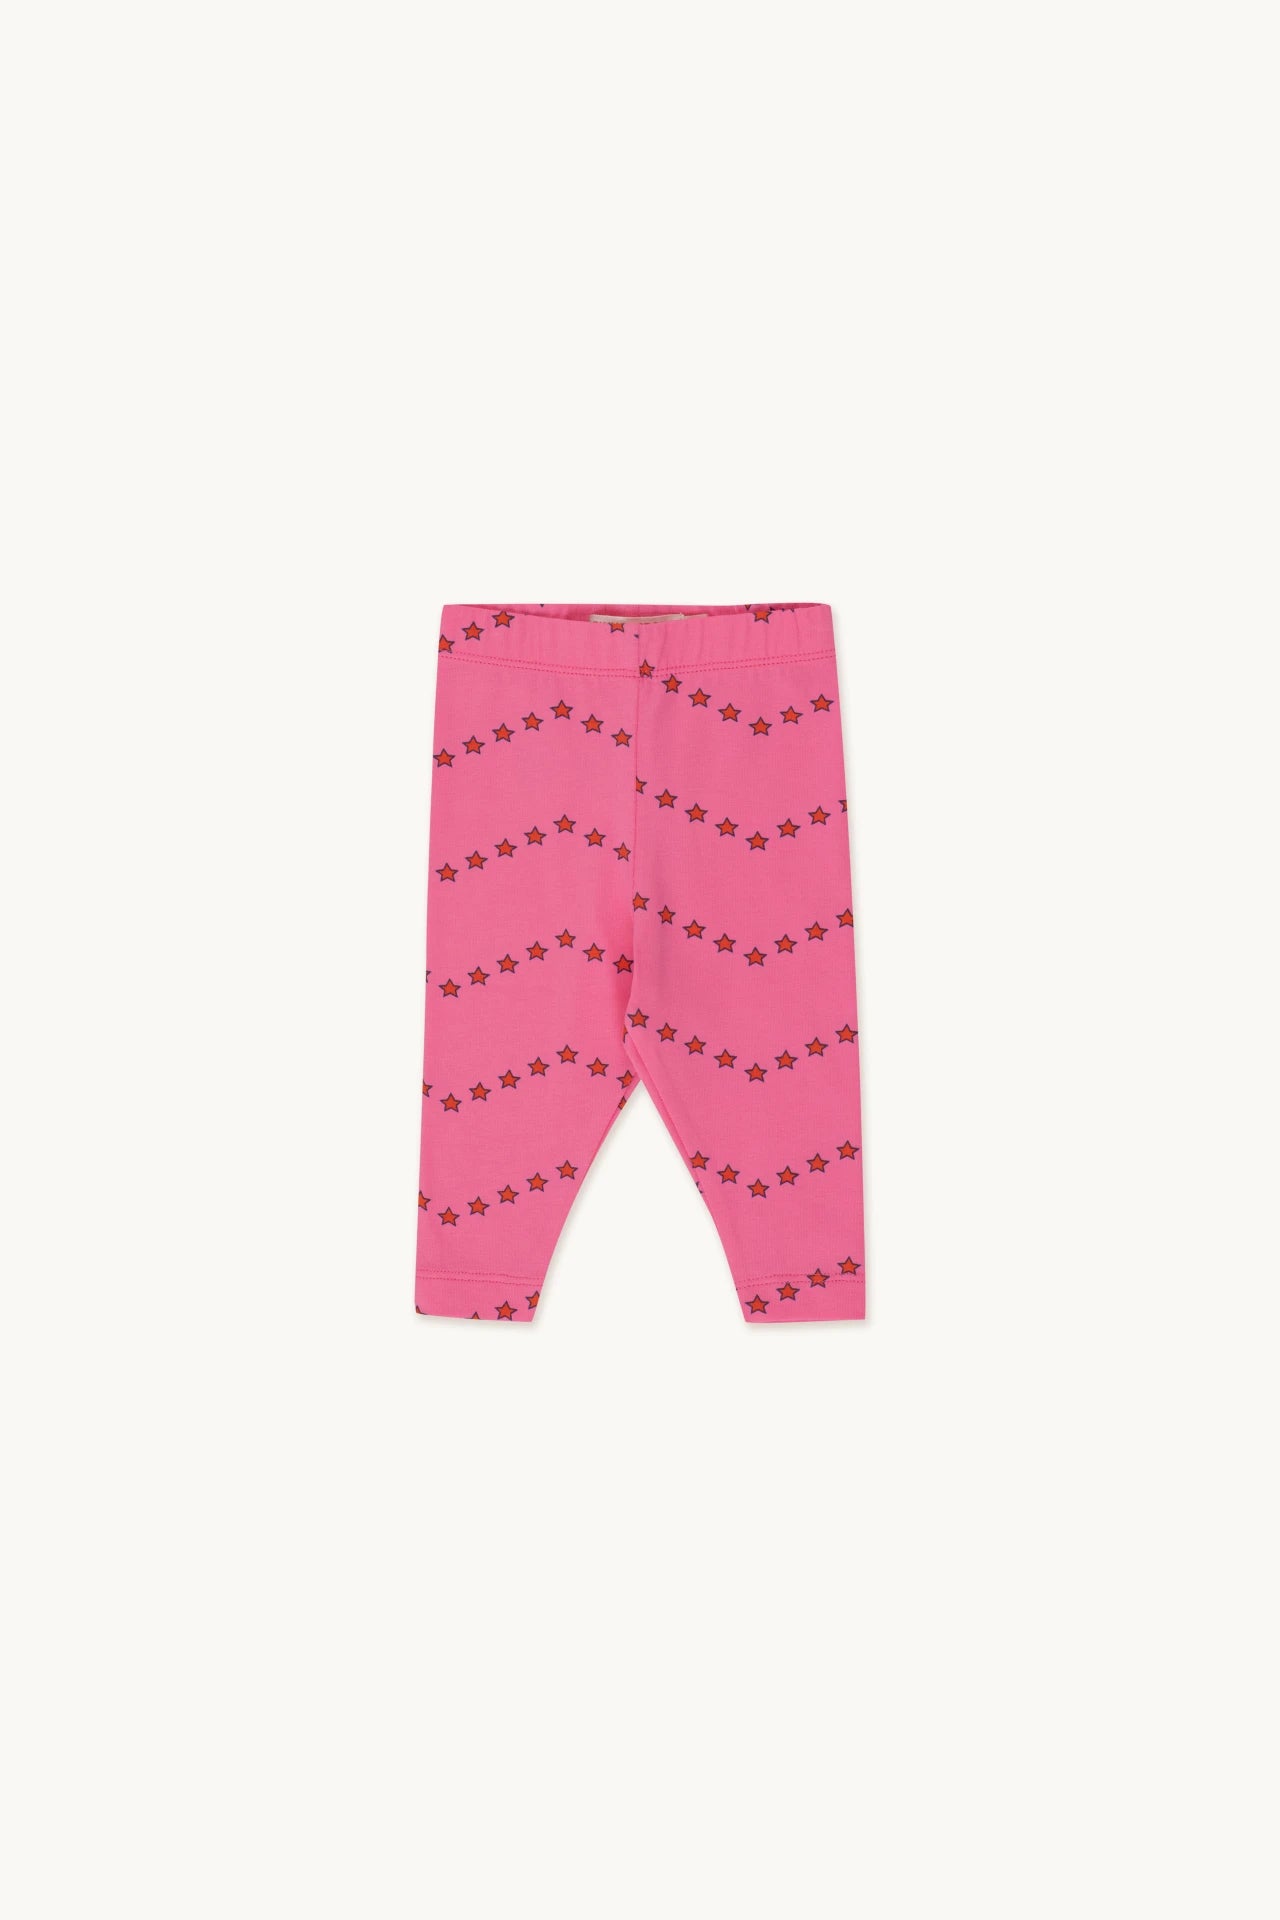 Tiny cottons zigzag baby pants SS24-037-M52